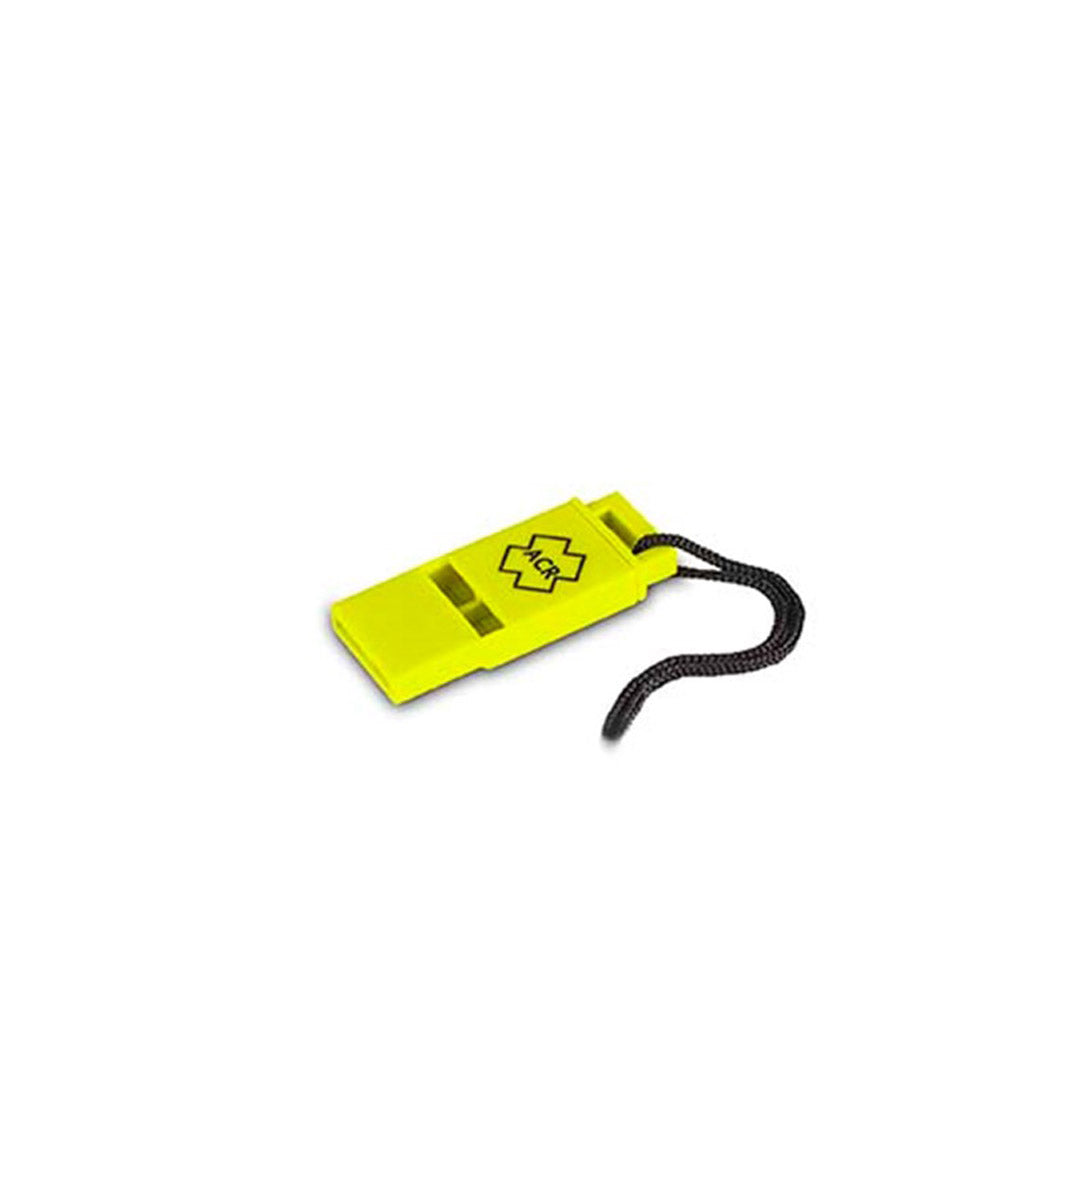 WW-3 Res-Q Whistle Emergency Device